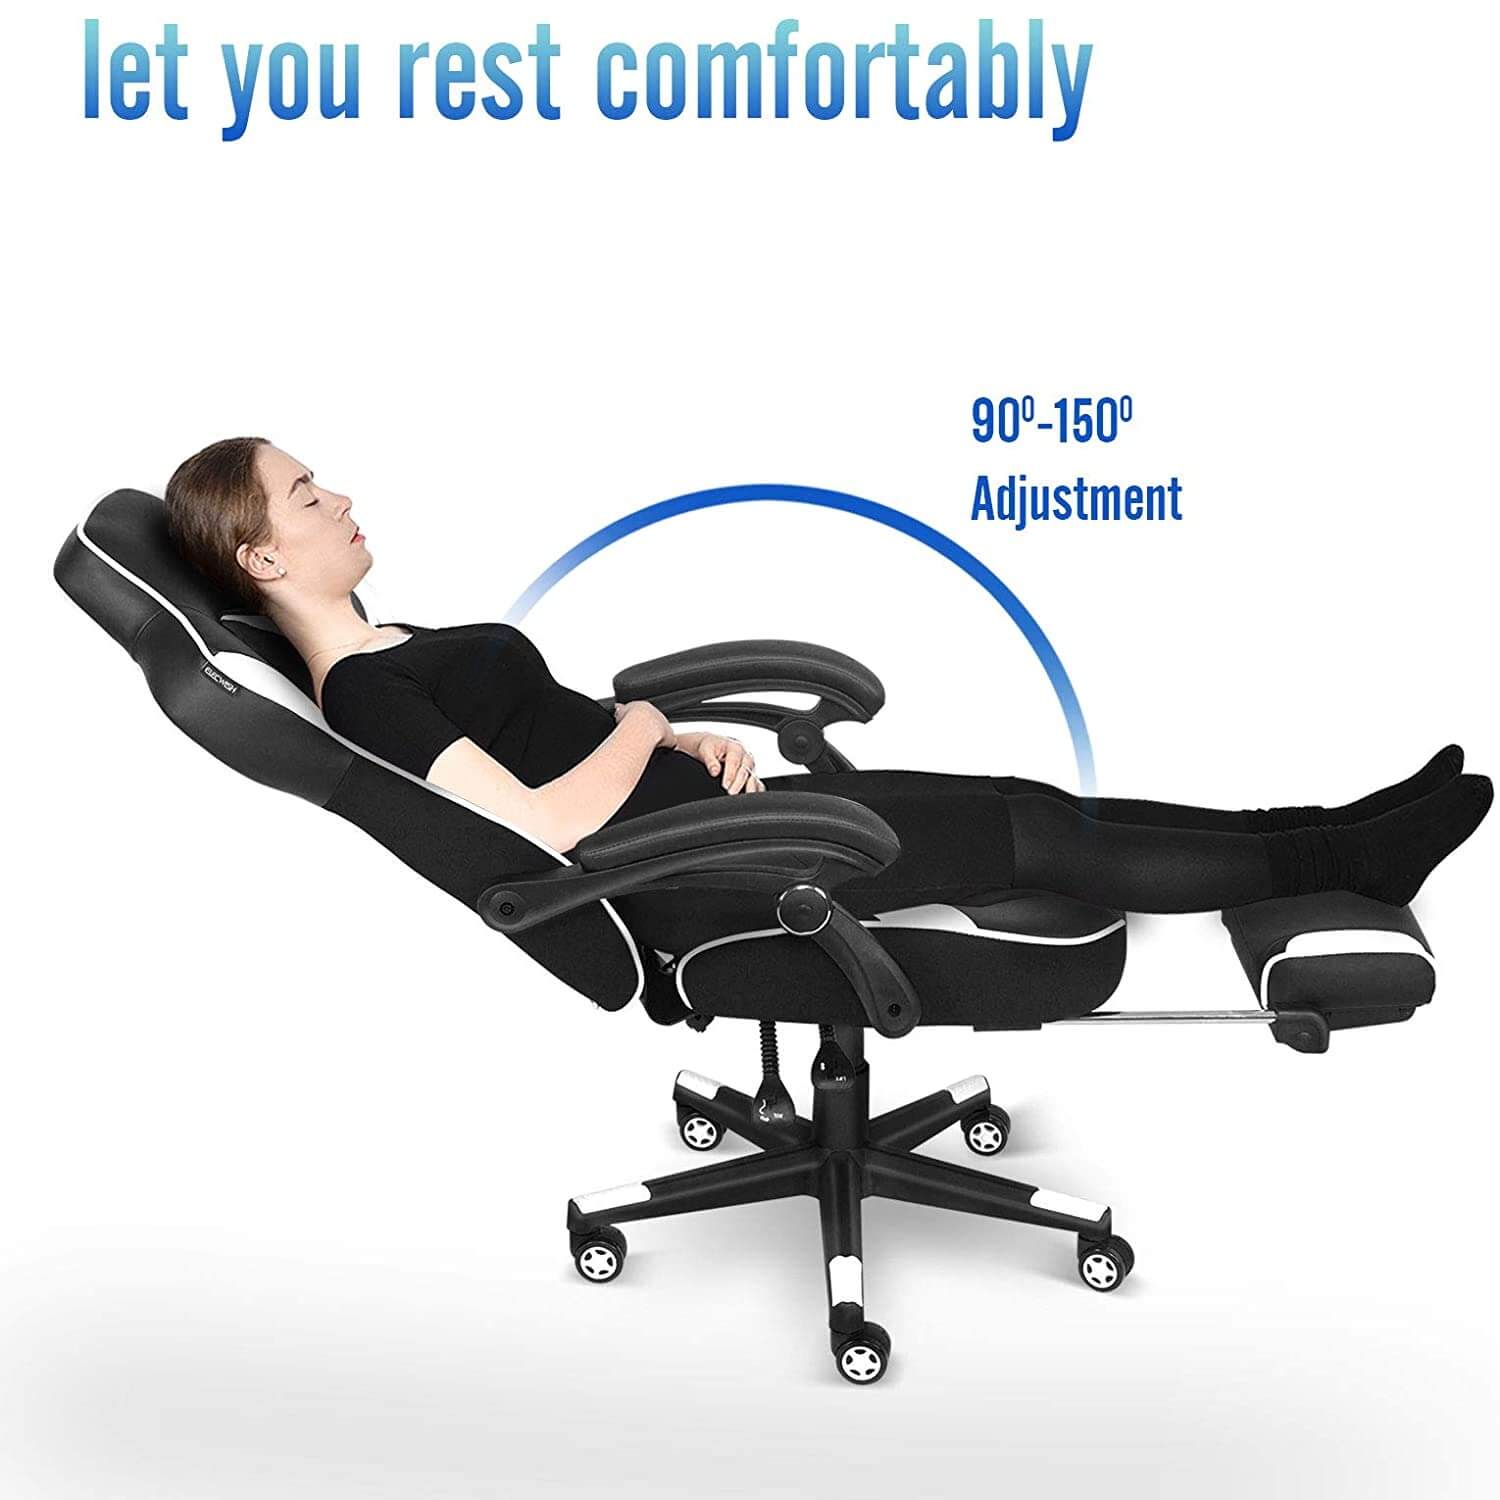 Elecwish white massage gaming chair with footrest OC112 can let you rest comfortably